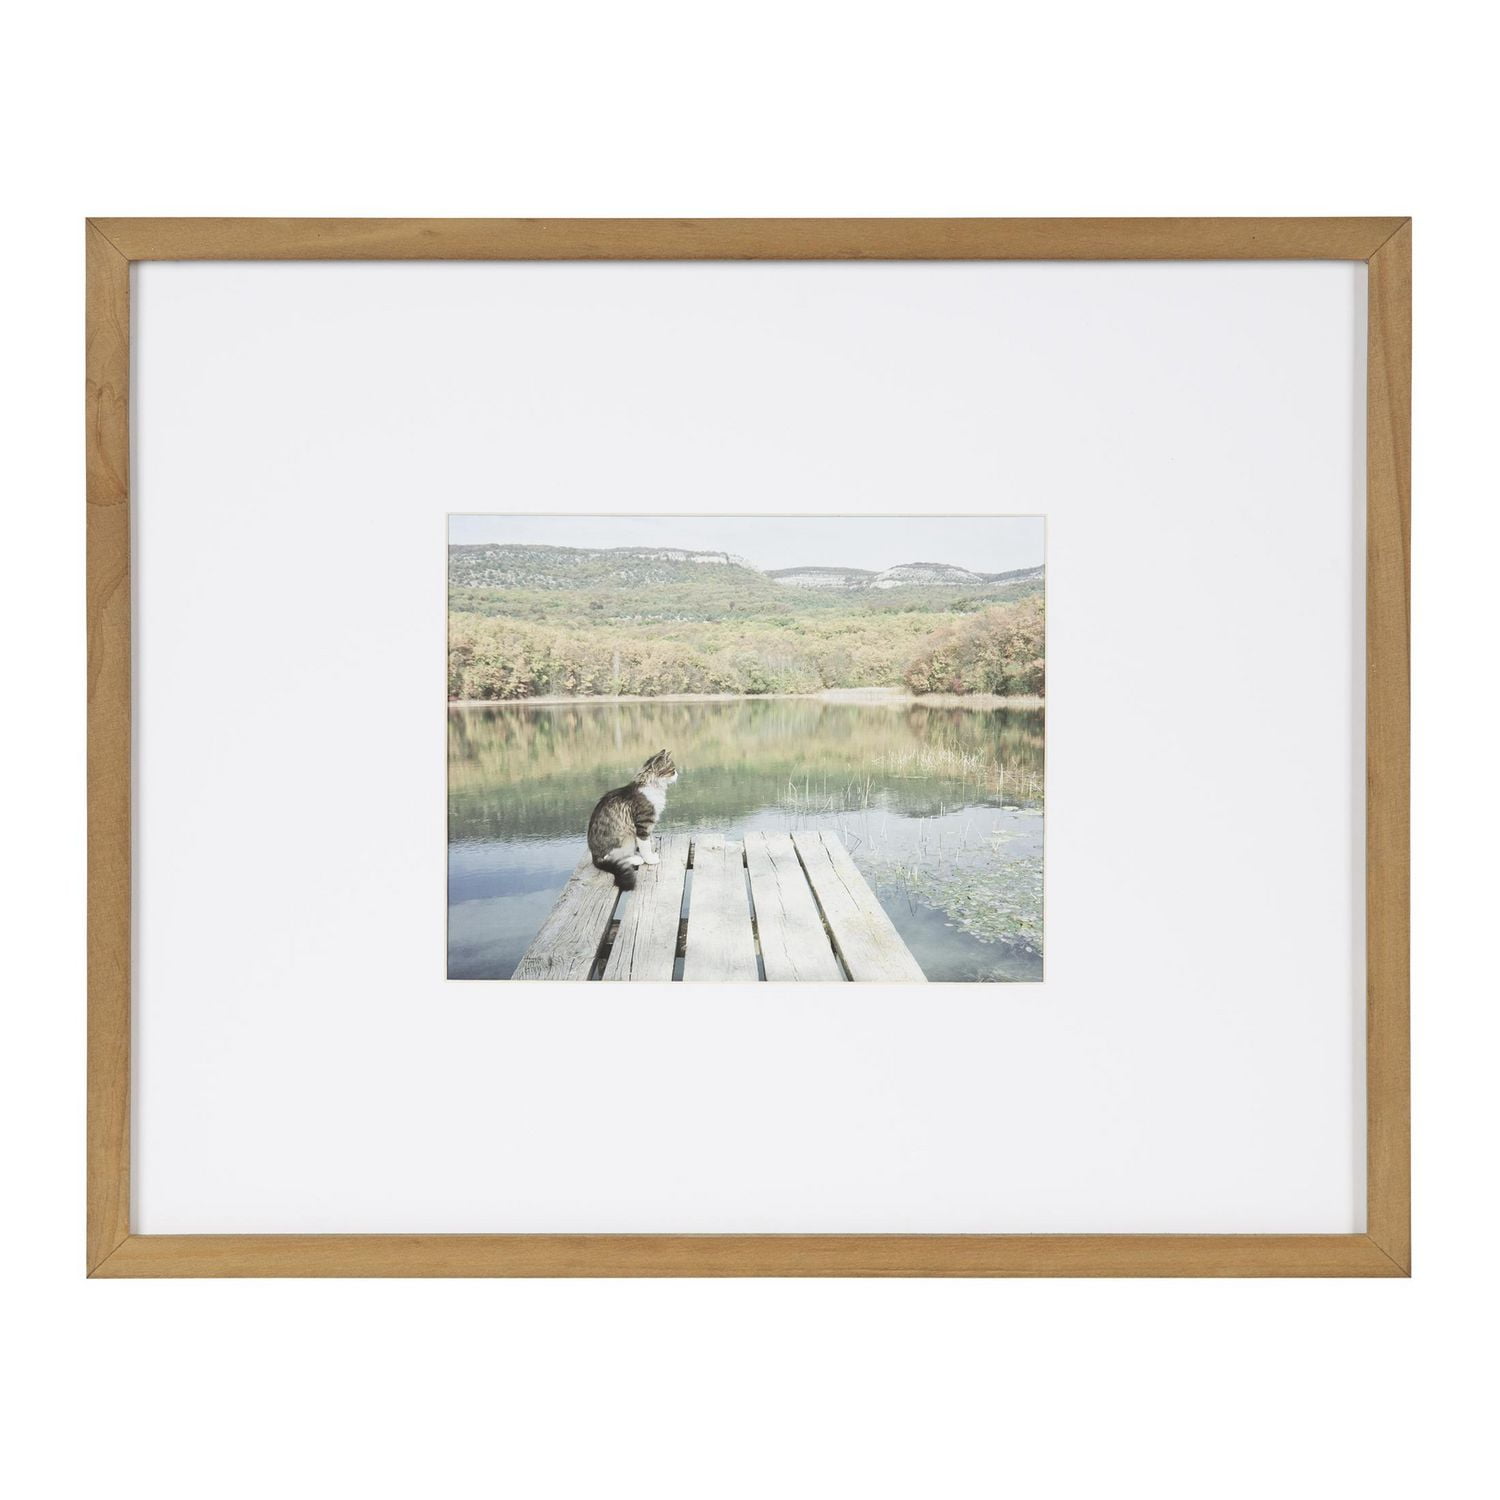 hometrends Rustic Gallery 16 x 20 Photo Frame, 16 x 20/8 x 10 